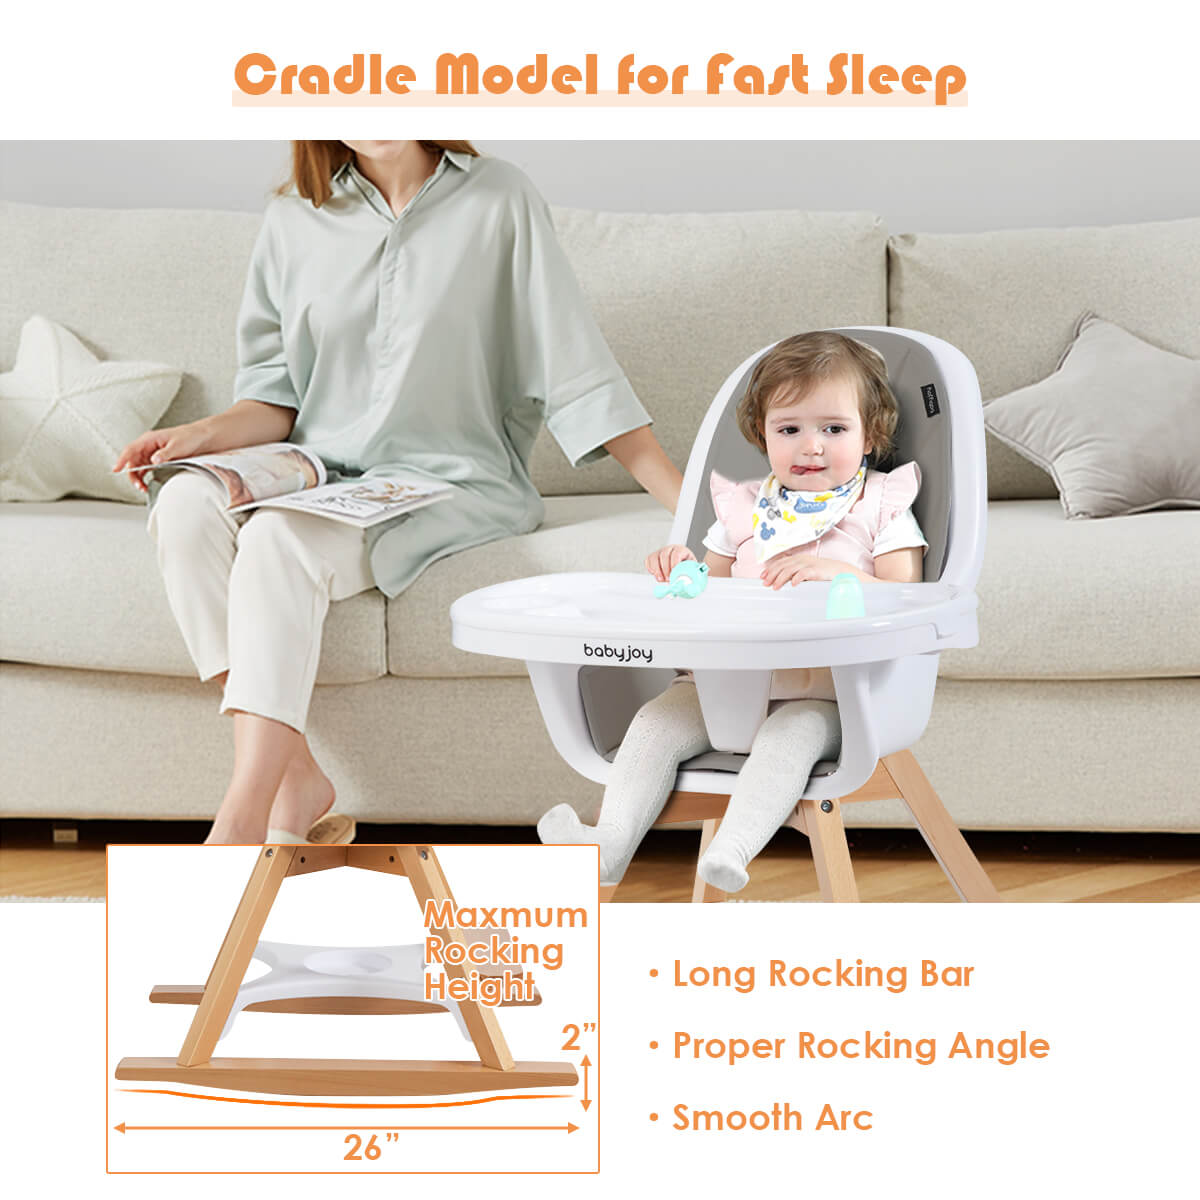 3-in-1 Convertible Wooden Baby High Chair, Gray - Gallery Canada